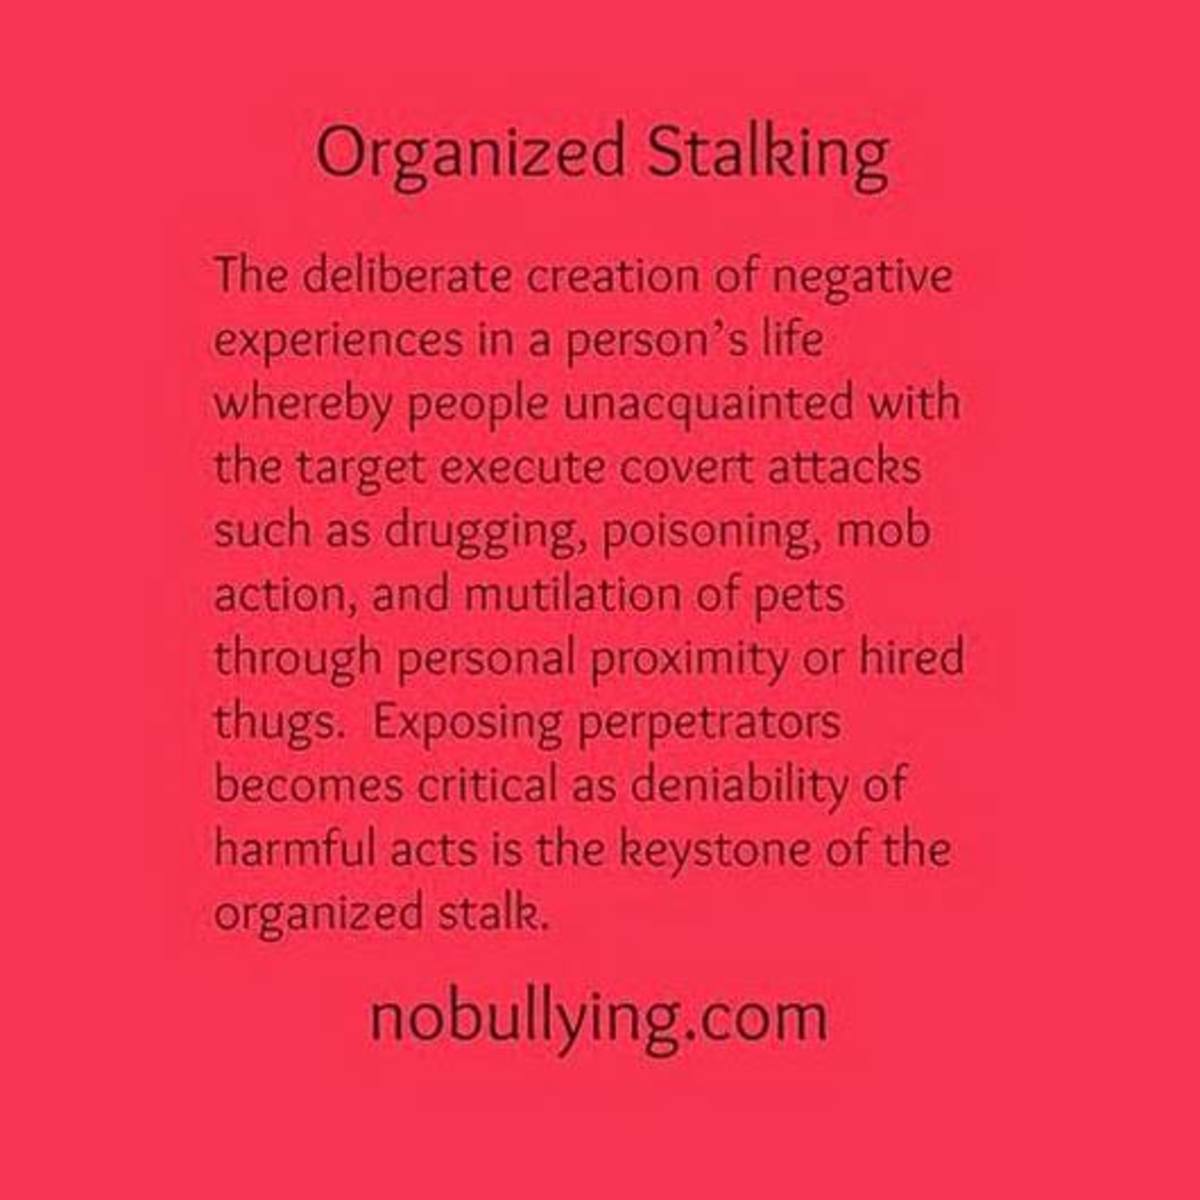 One definition of organized stalking.